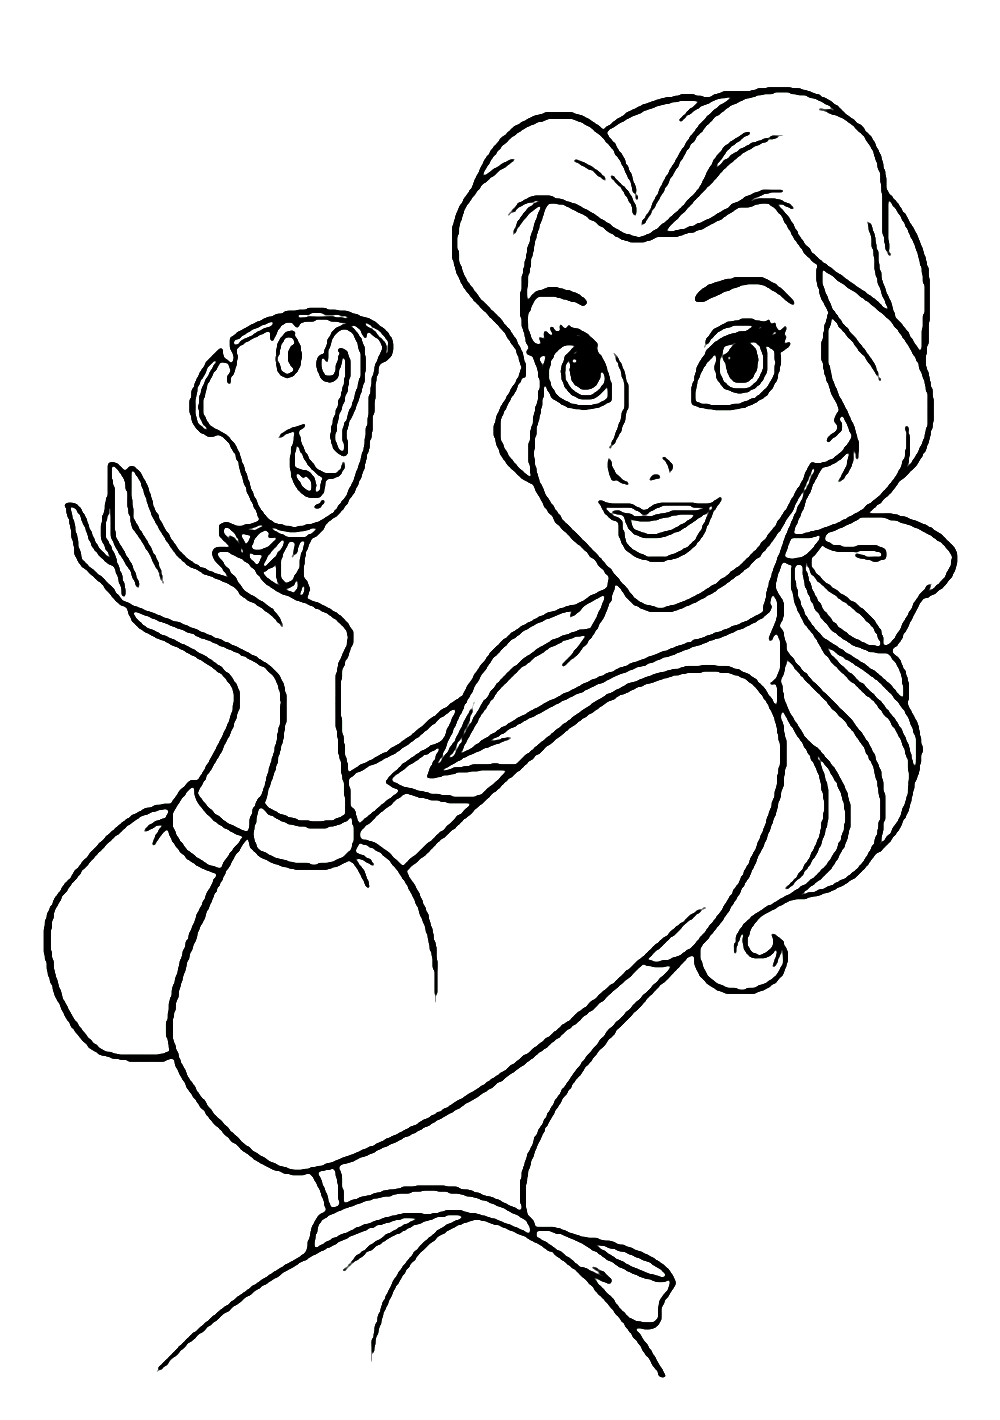 Enchanted Beauty Princess Belle Coloring Page